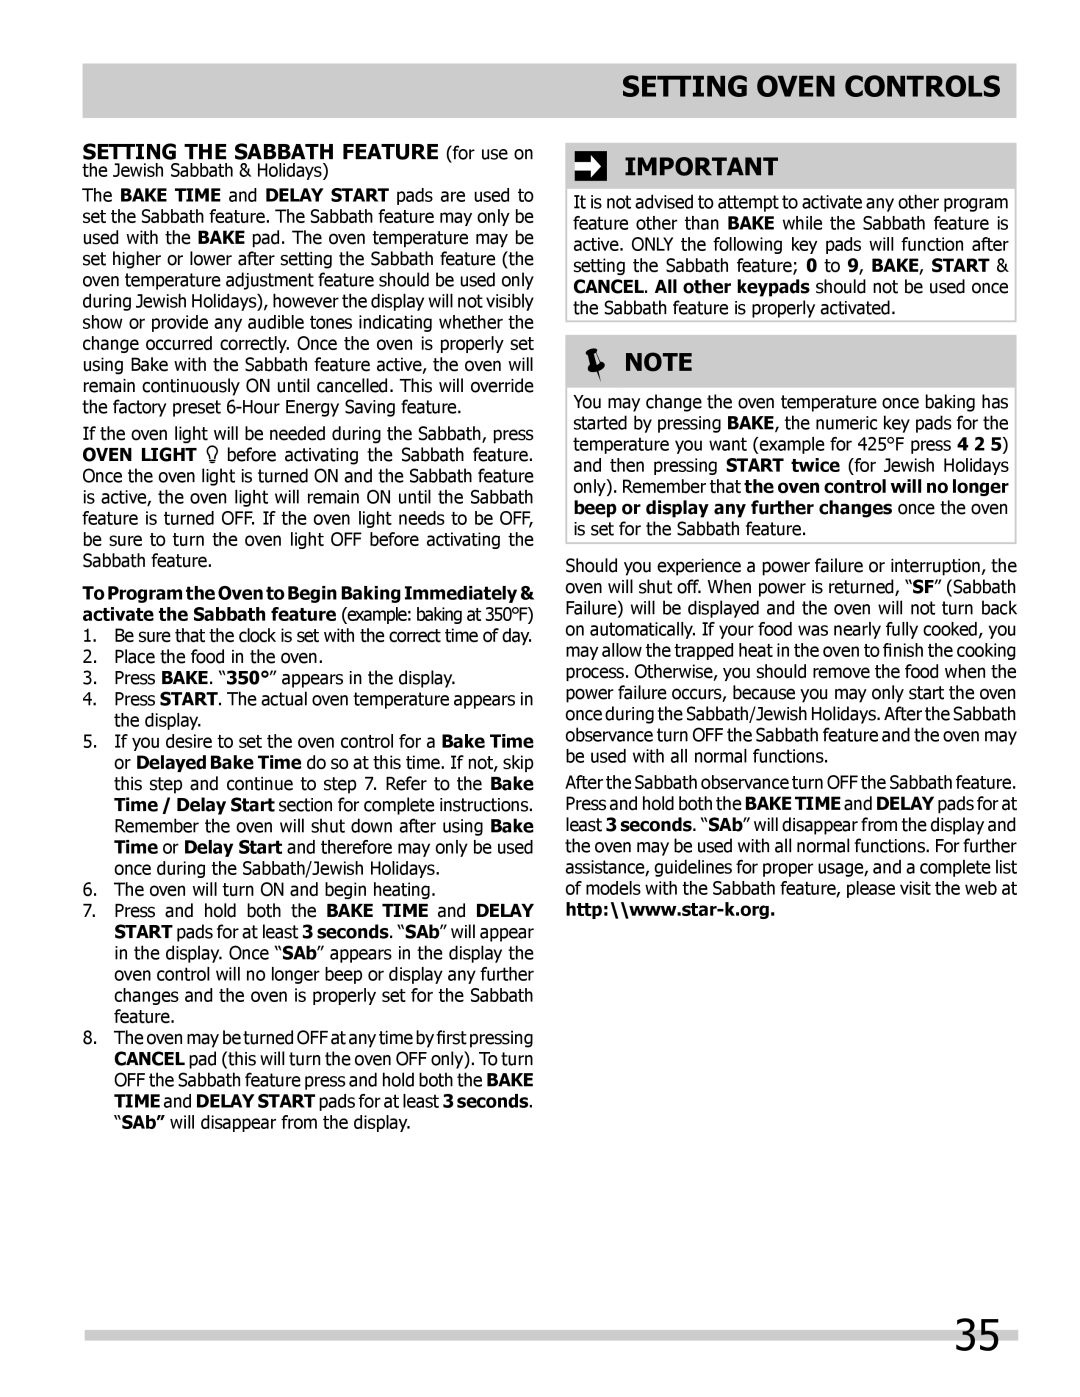 Frigidaire 318205300 important safety instructions Setting Oven Controls,  Note 